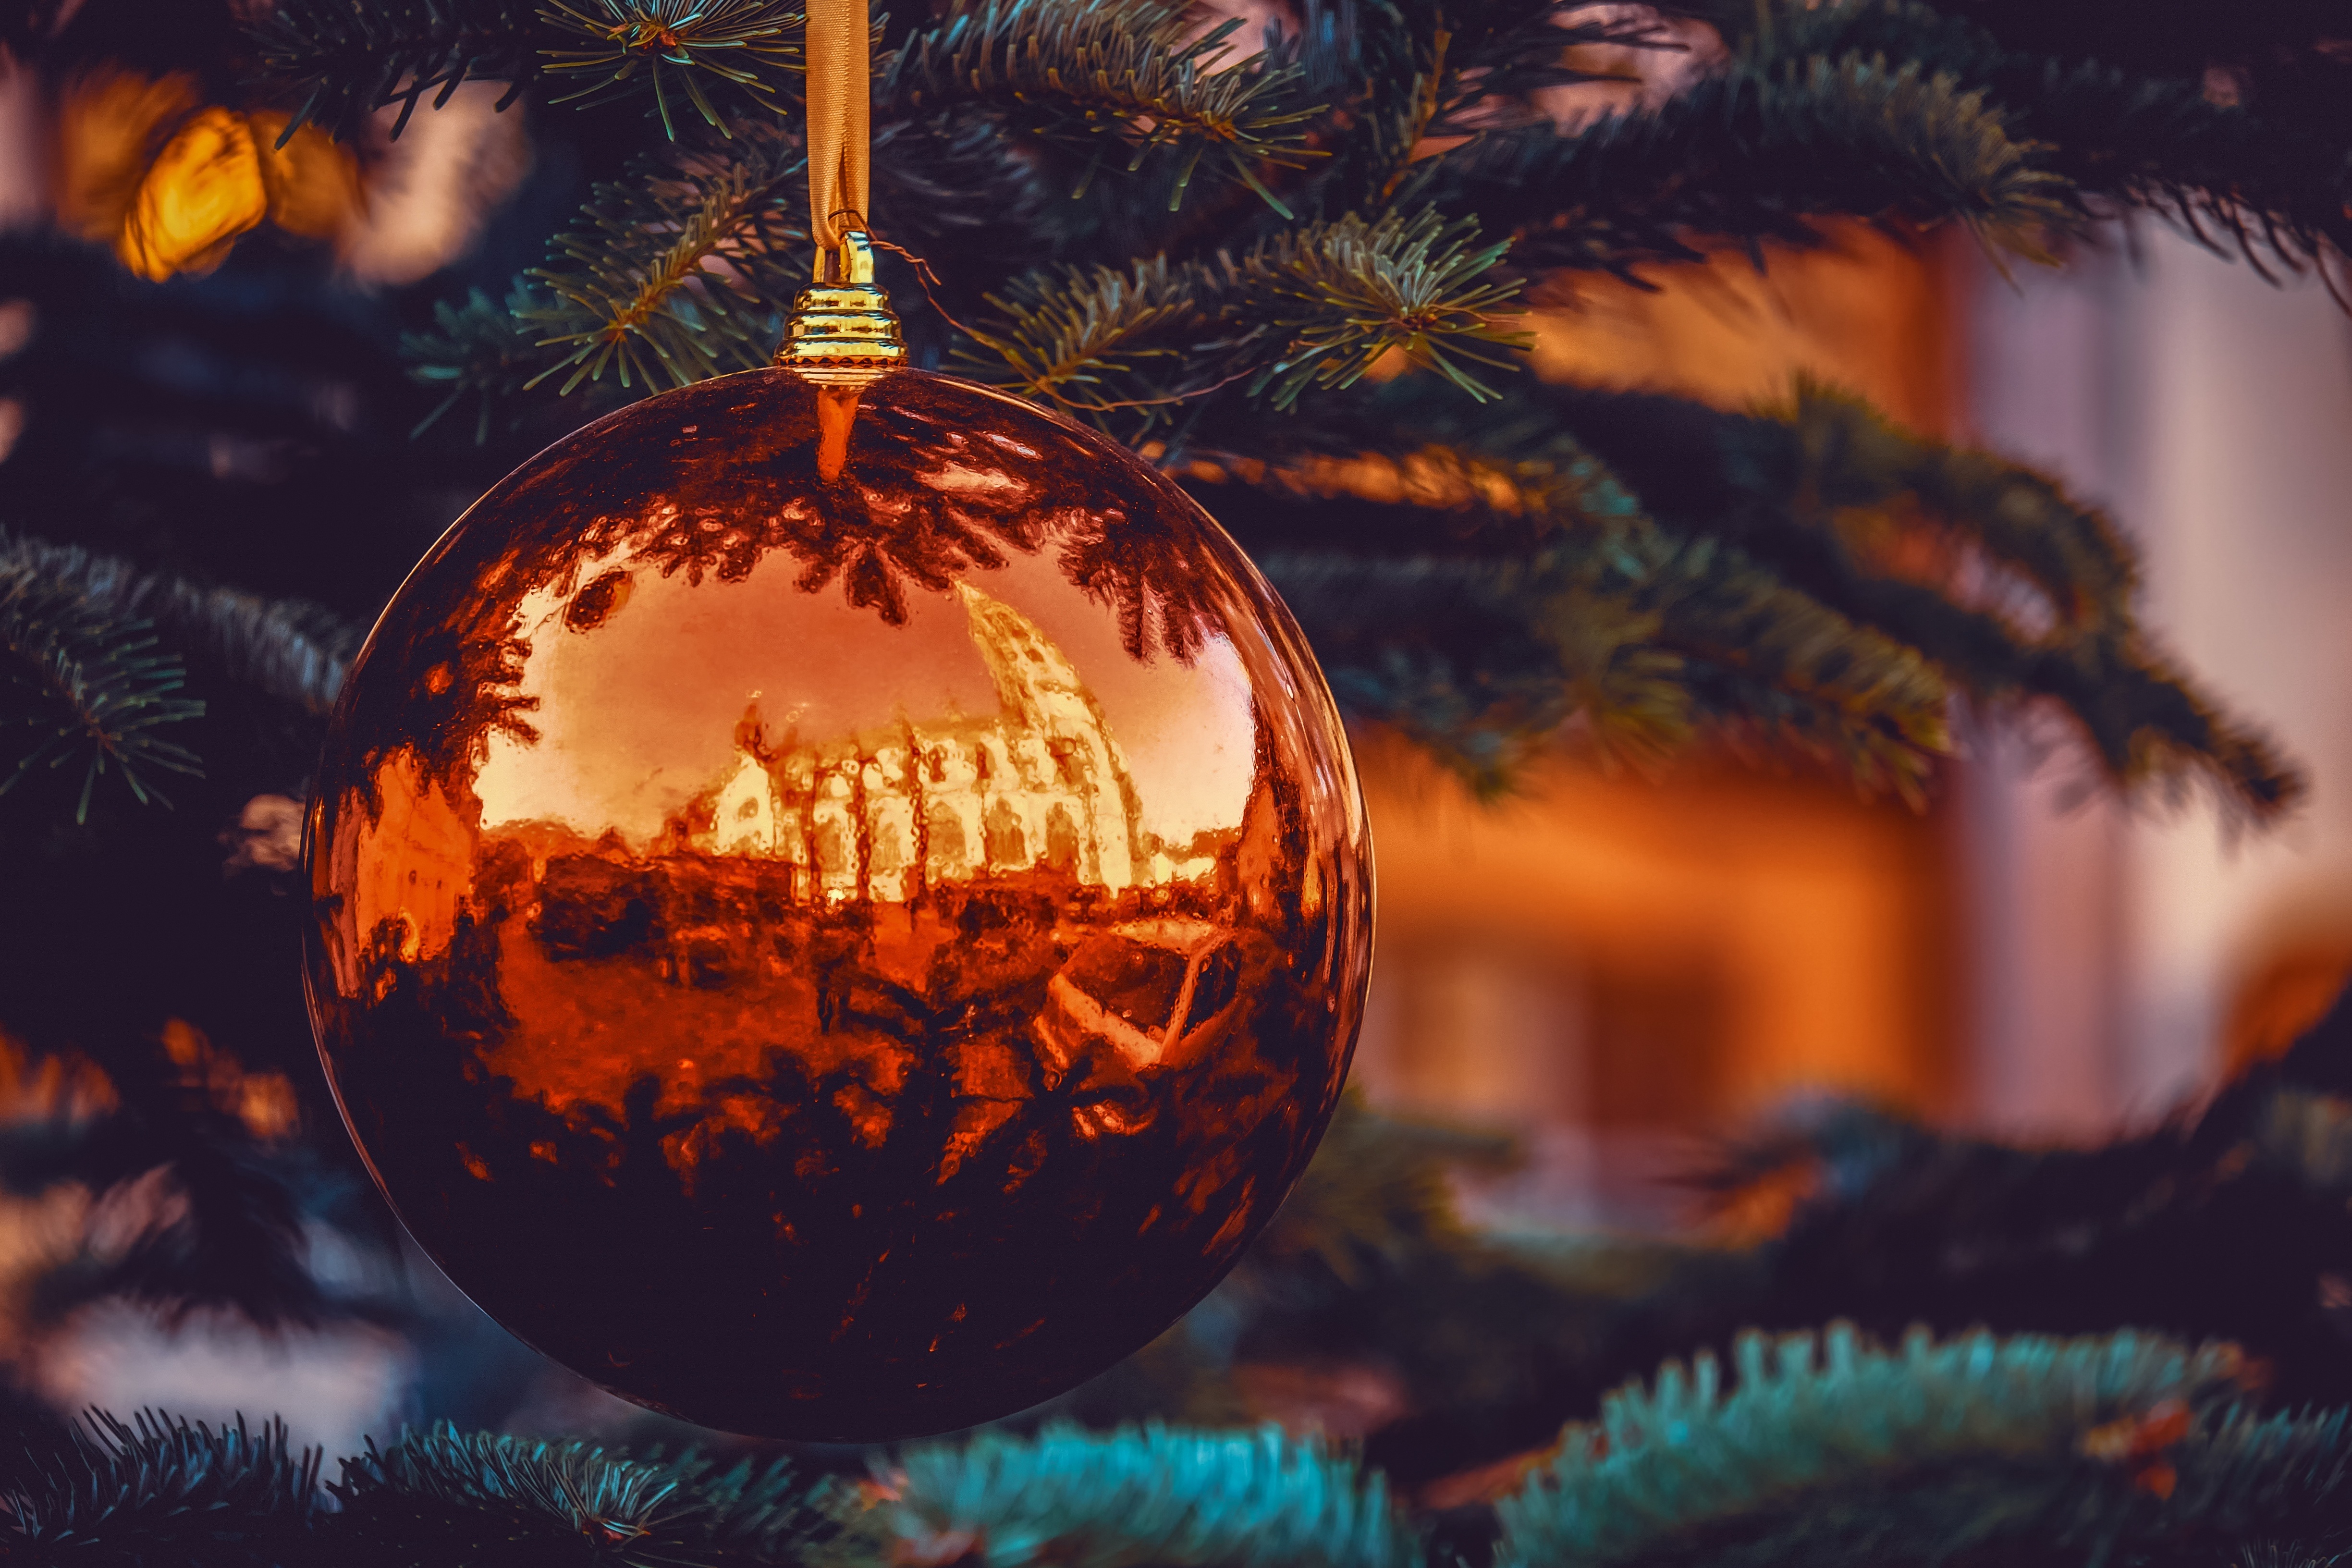 Christmas Ornaments Bauble Reflection 4896x3264